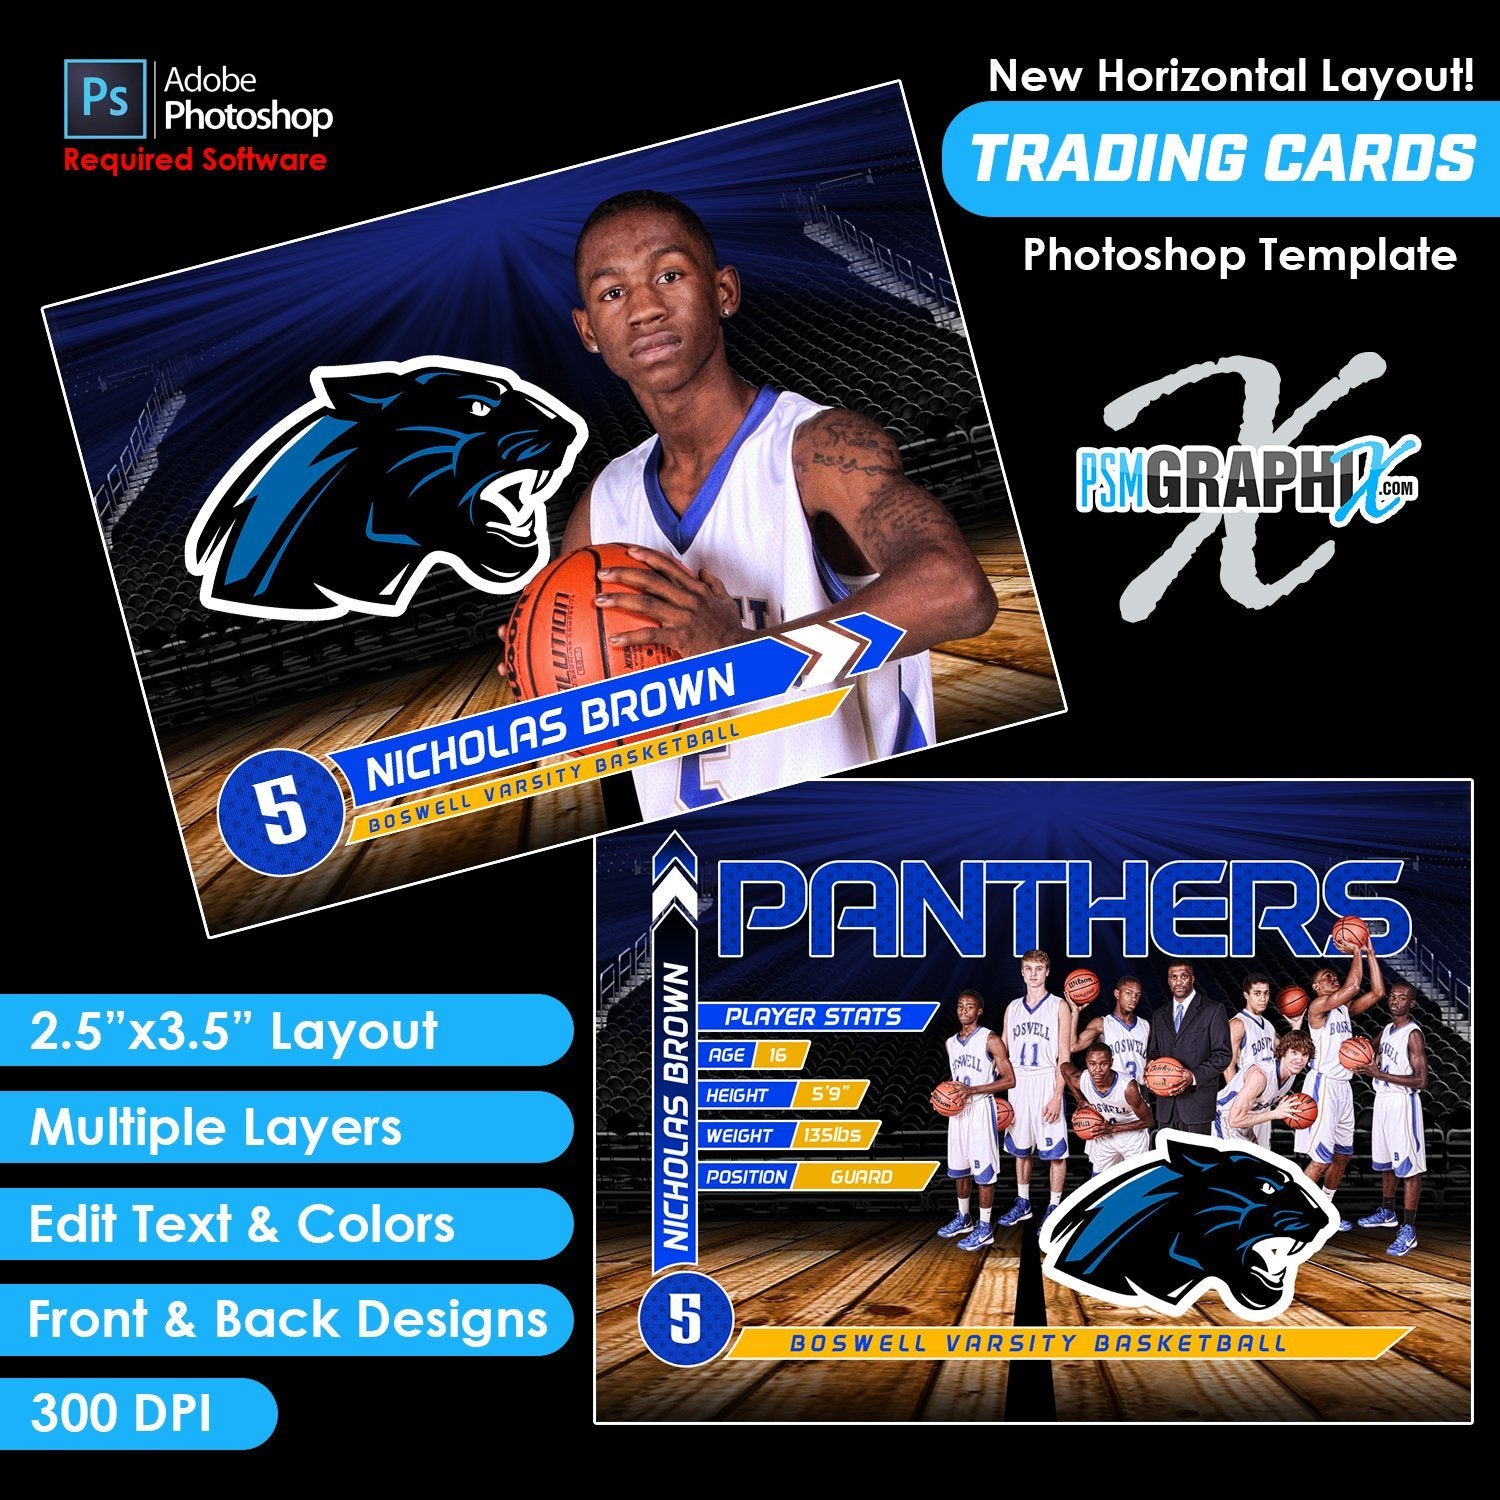 Full Court - V2 - Game Day Trading Card Template-Photoshop Template - PSMGraphix